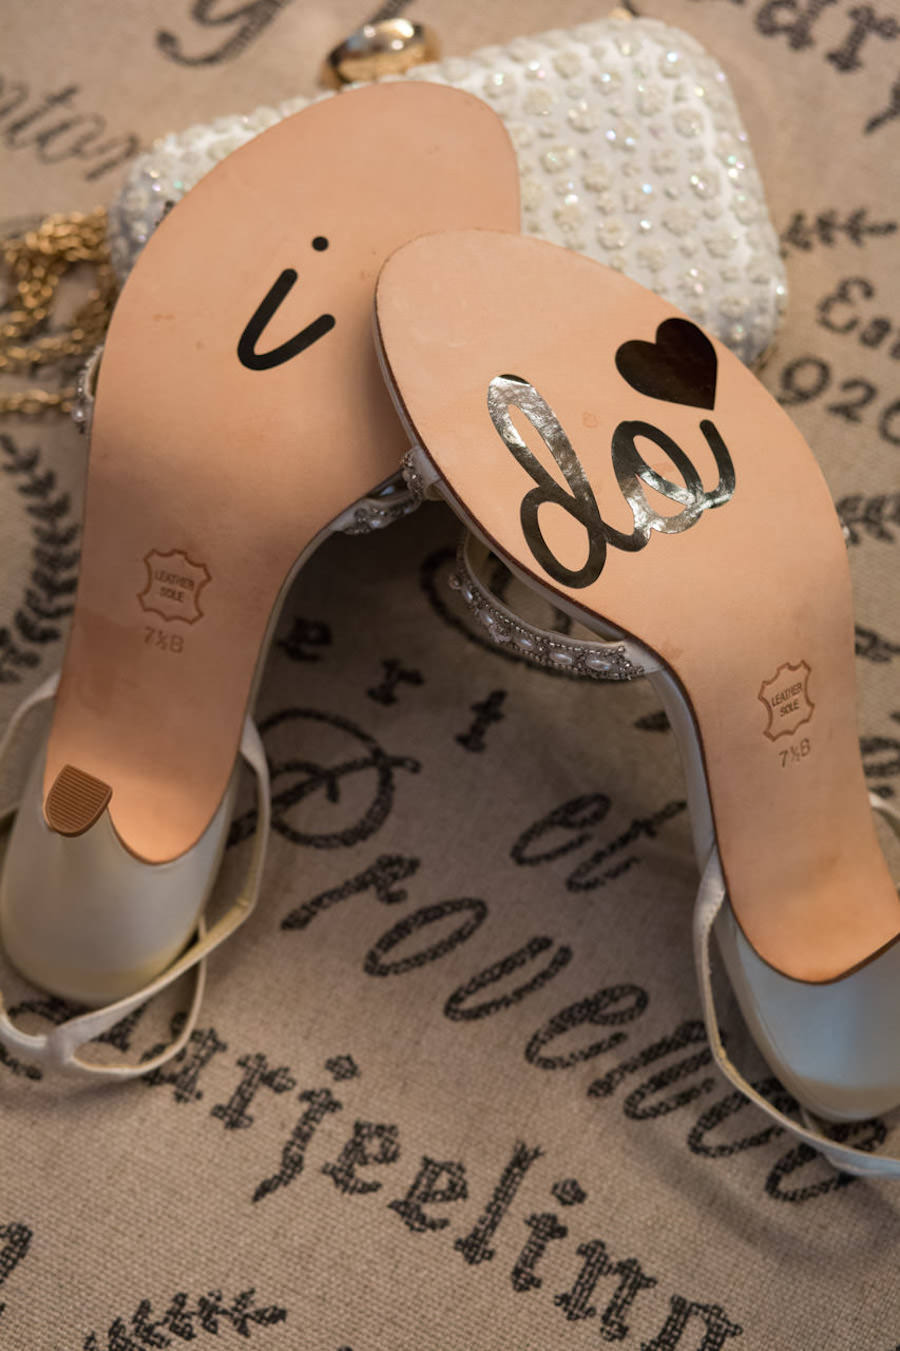 Silver, Bridal Wedding Shoes with I Do Written on Bottom of Shoe